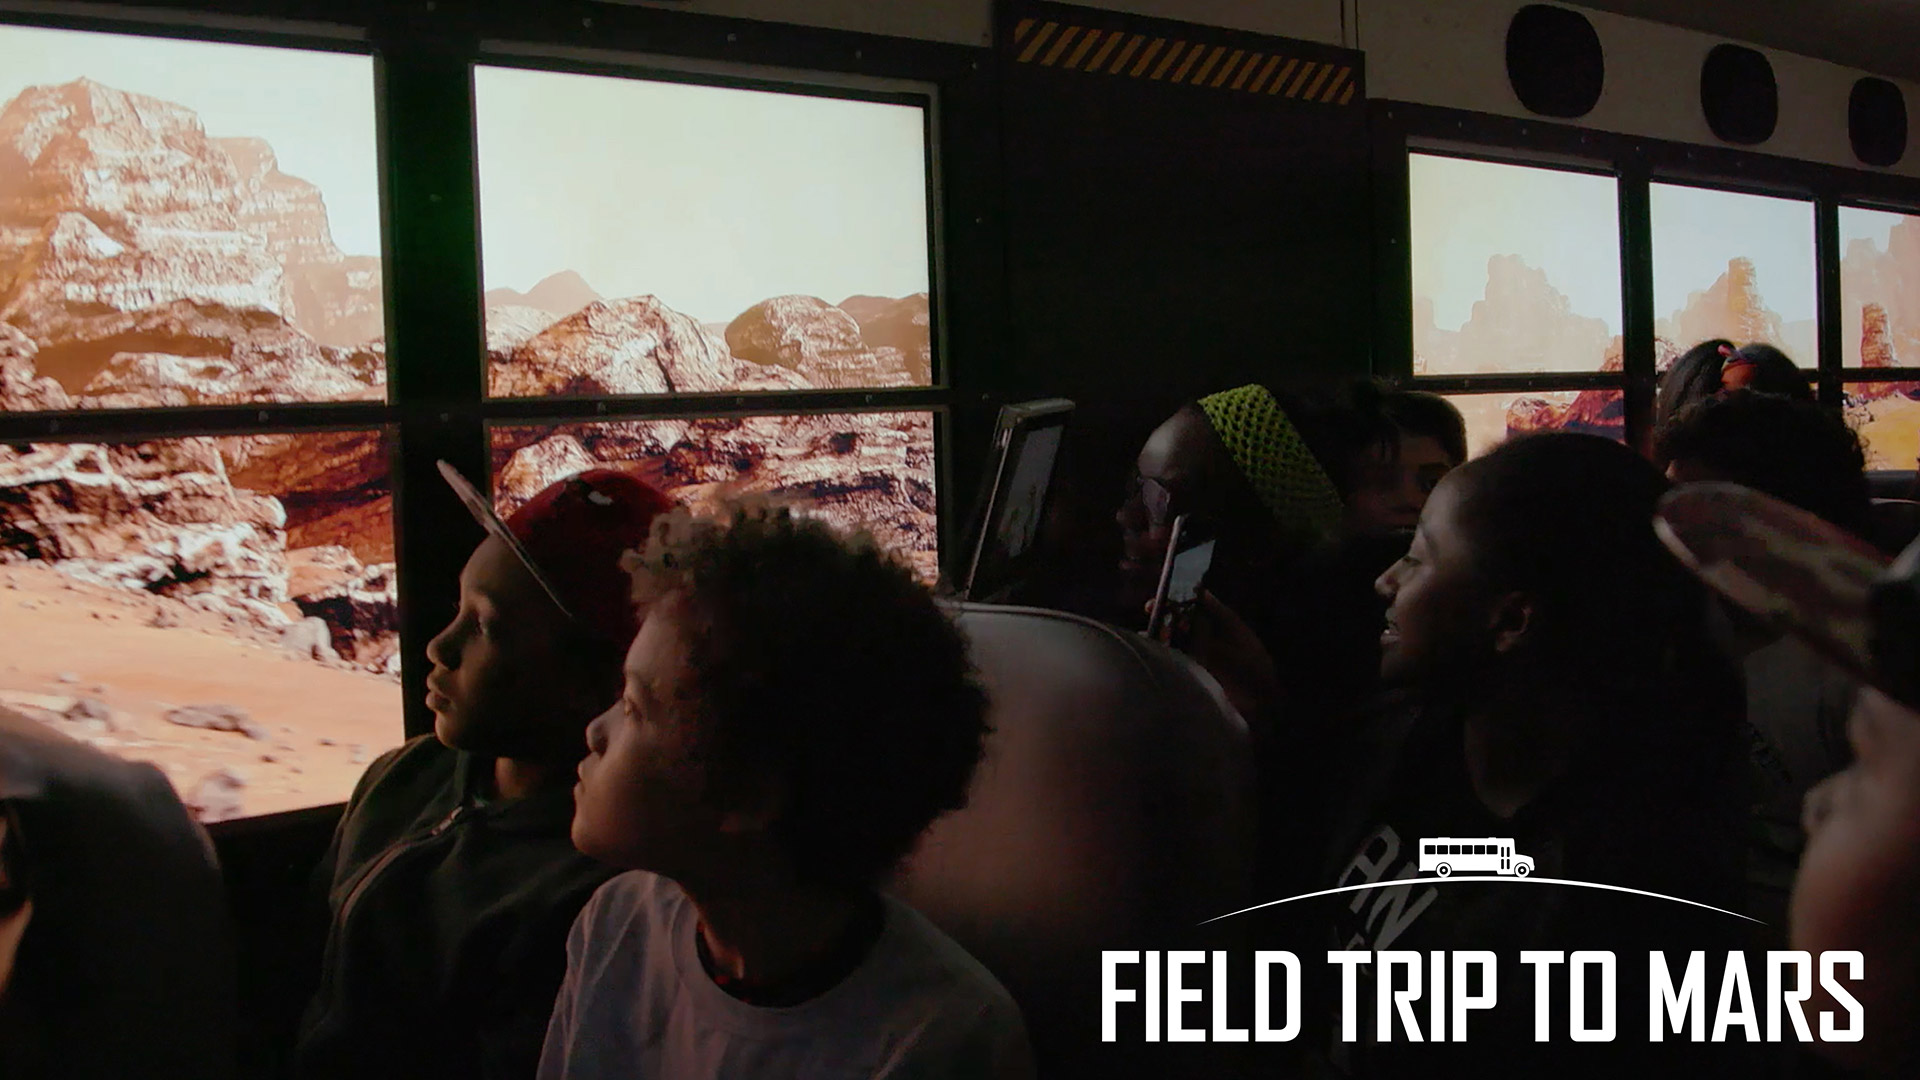 The Field Trip to Mars